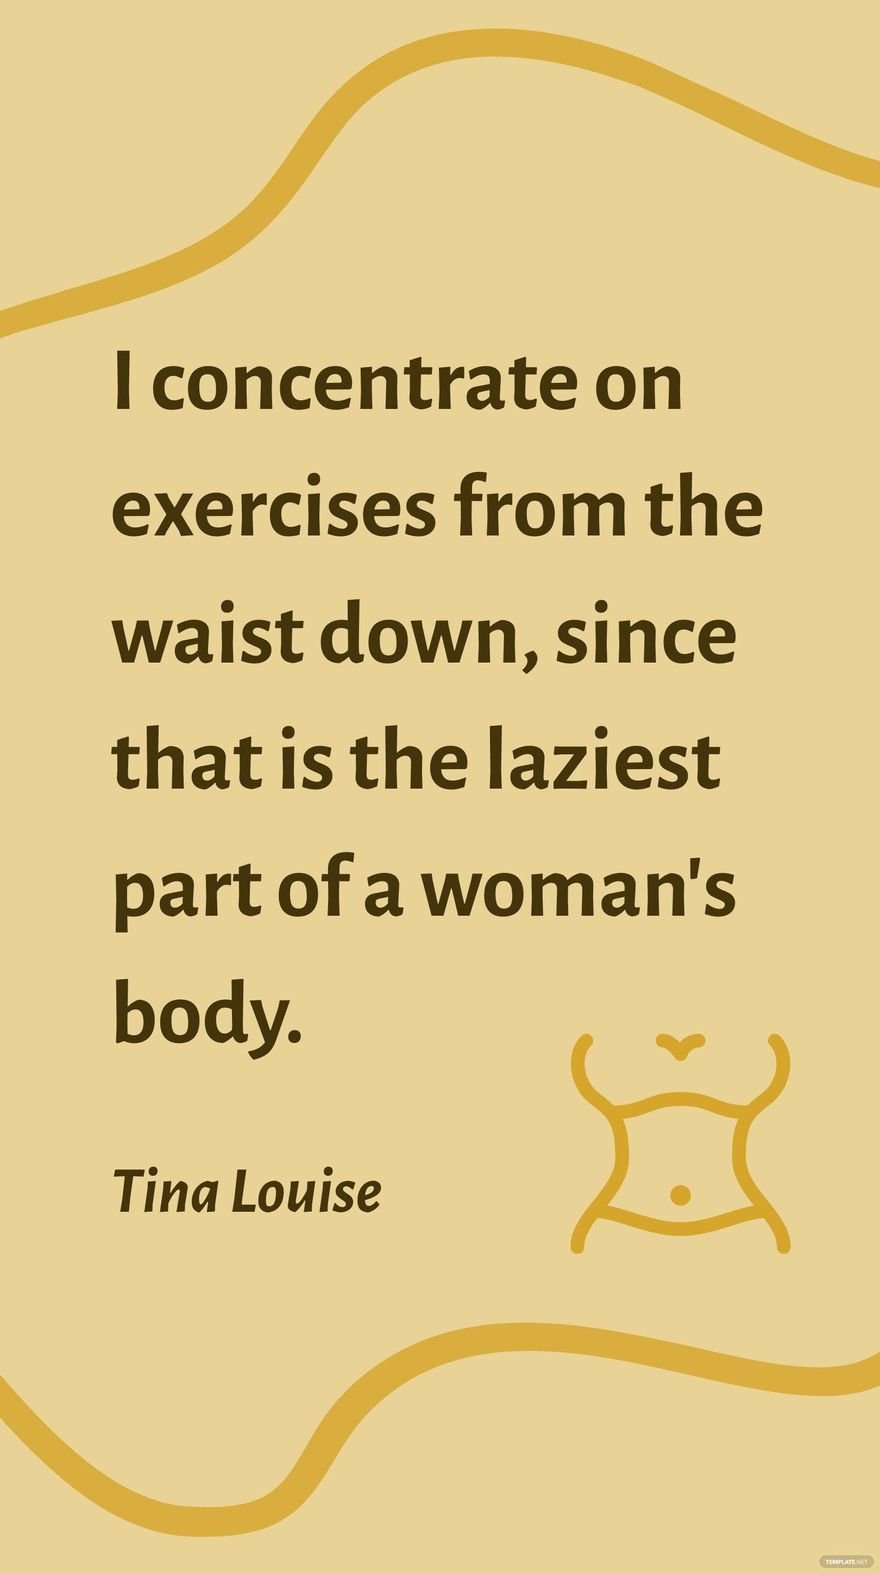 Tina Louise - I concentrate on exercises from the waist down, since that is the laziest part of a woman's body. in JPG